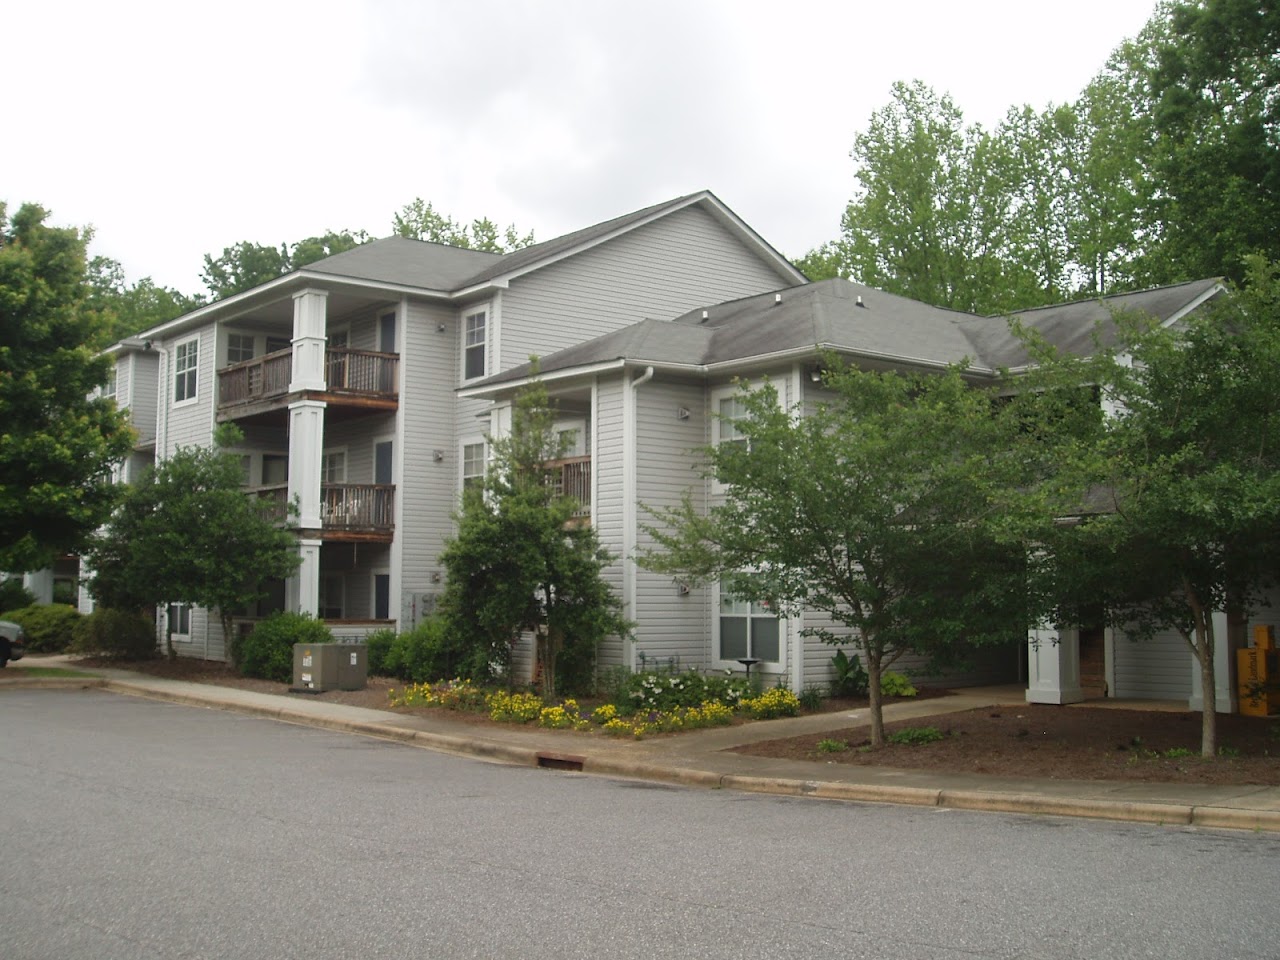 Photo of FOREST PARK GARDENS PHASE I. Affordable housing located at 1321 FOREST PARK TERRACE STATESVILLE, NC 28677